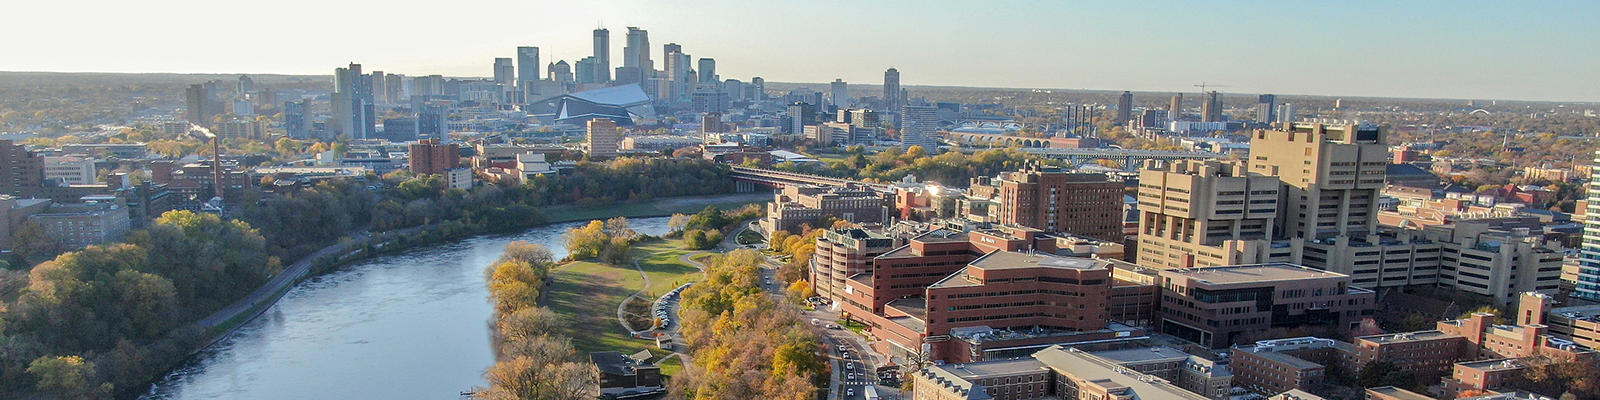 Downtown Minneapolis, the Mississippi River, and the UMN campus